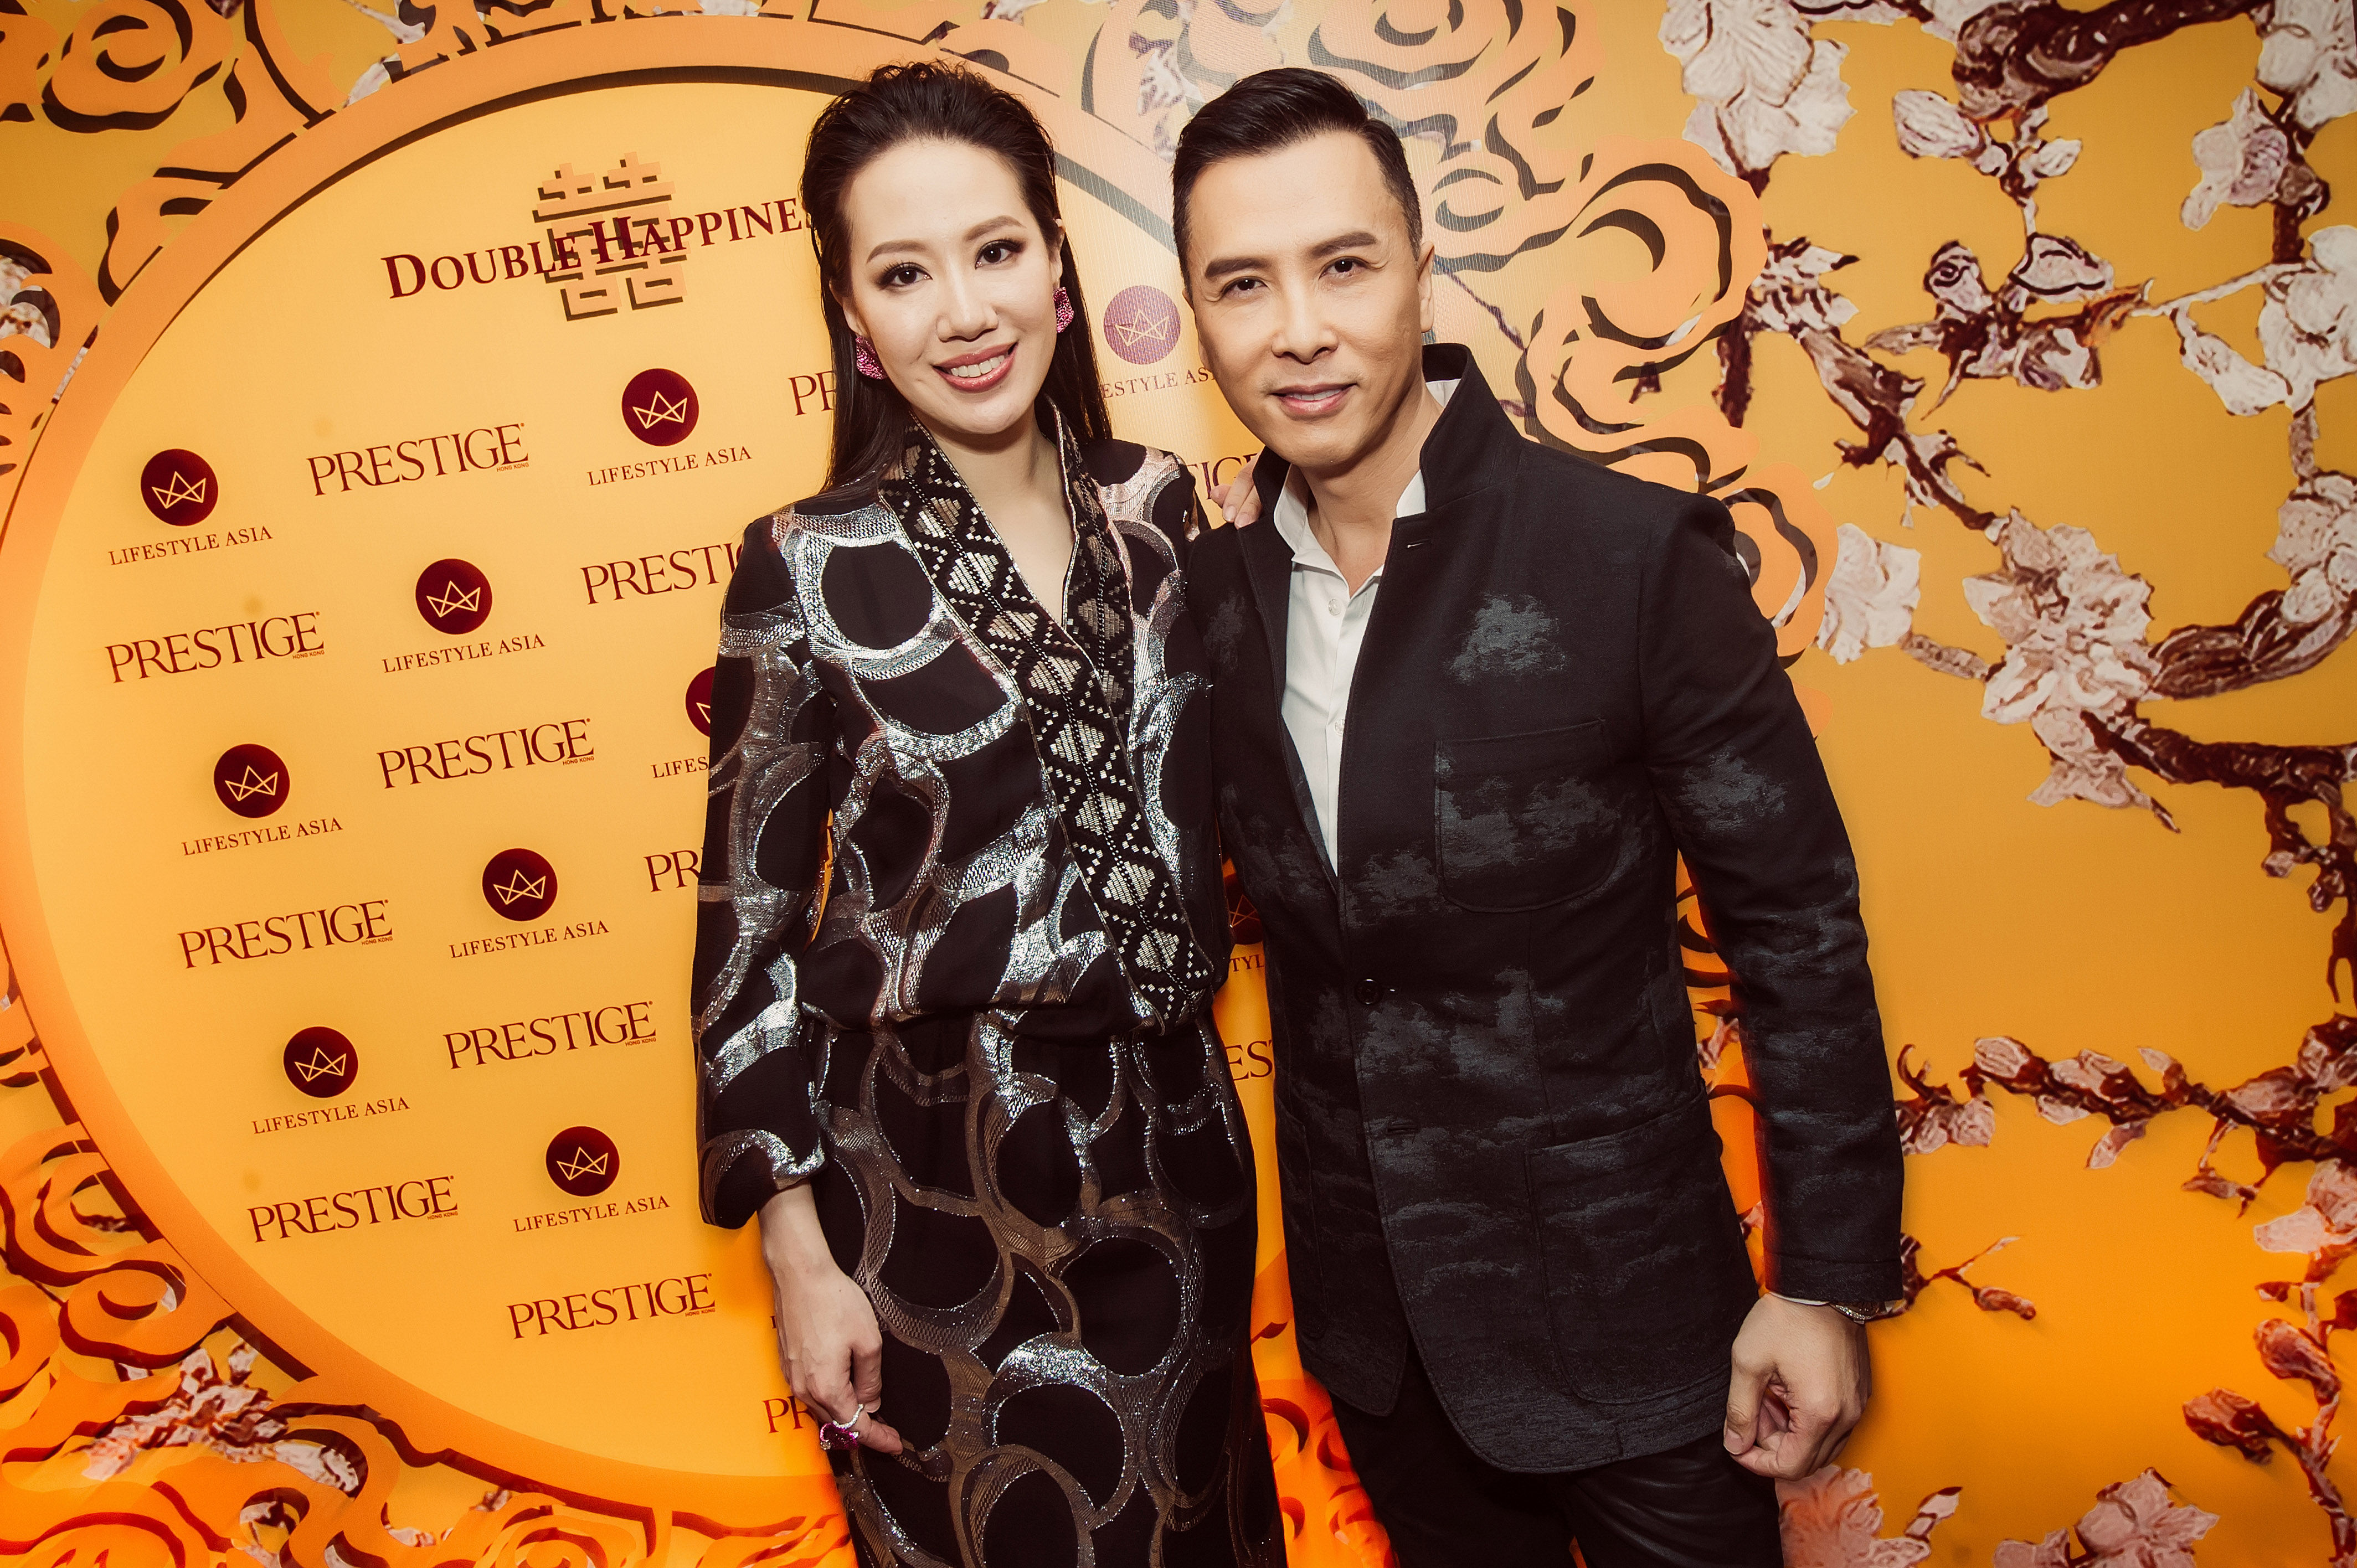 Lifestyle Asia x Prestige Hong Kong ‘Double Happiness’ celebration party